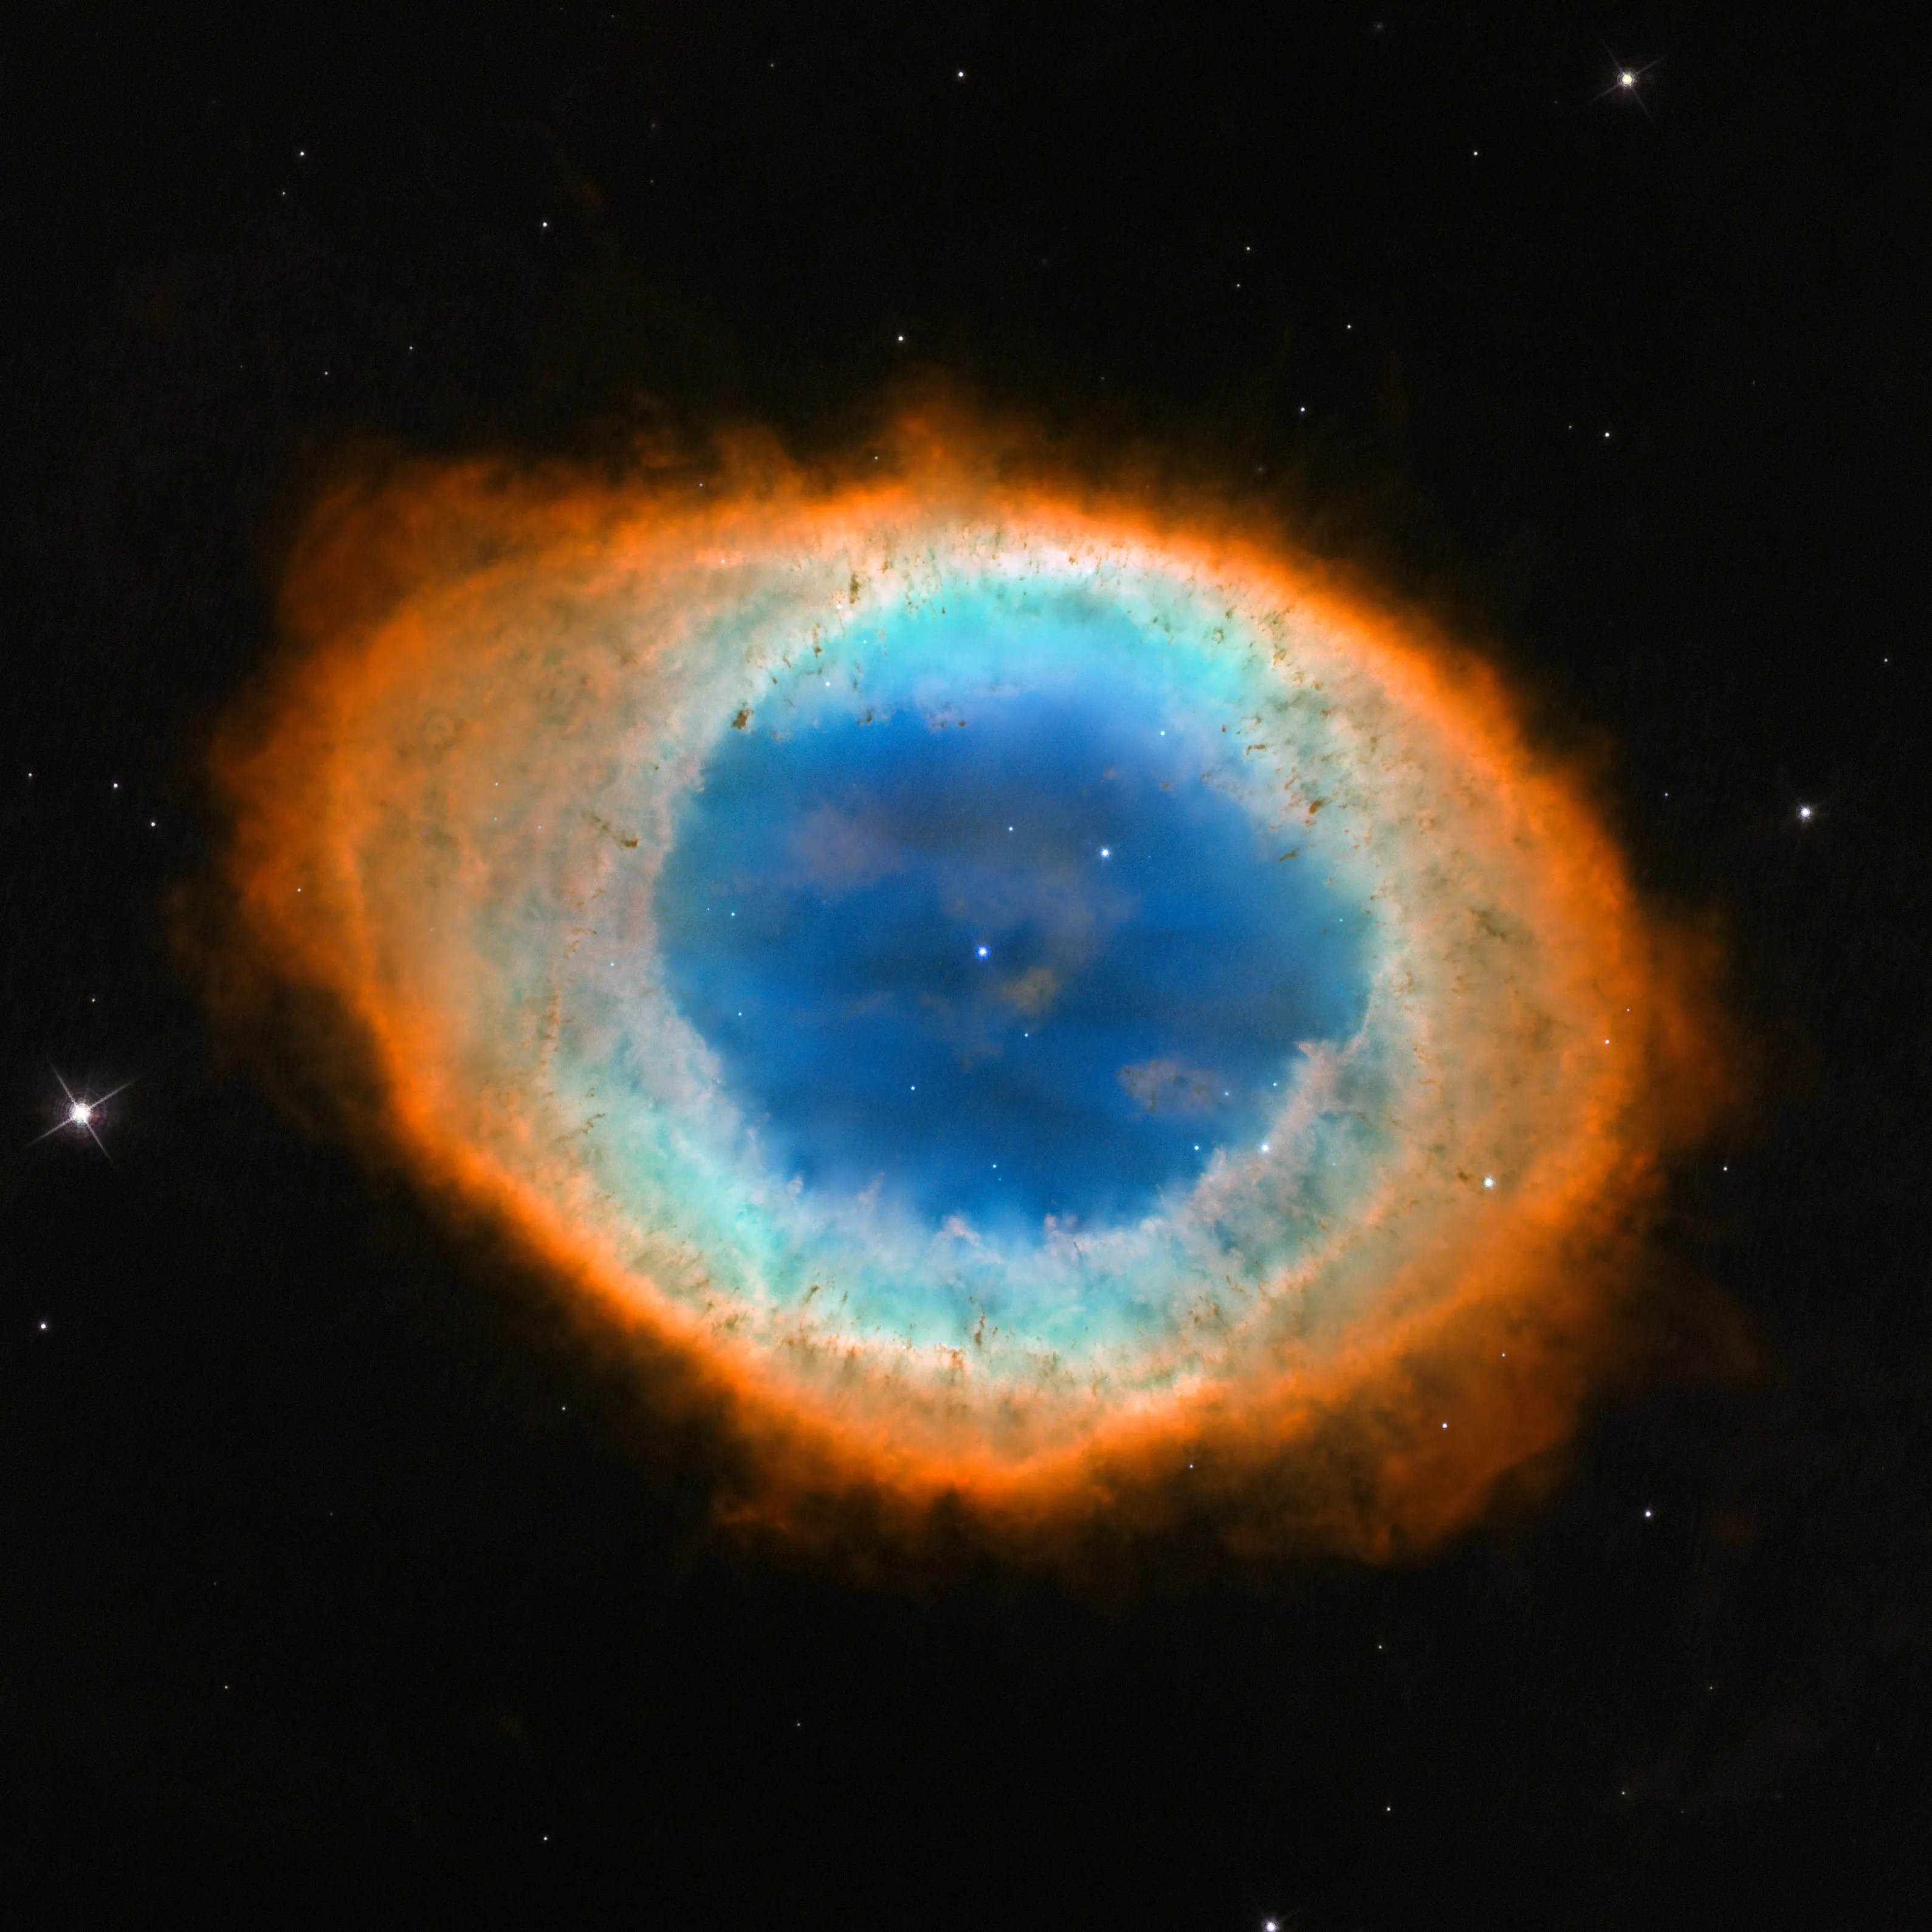 Black background holding an oval of light. The outer ring of the oval is orange-red. Moving inward the ring is more greenish-yellow. The center of the ring is bright blue with one small star at its center and another above and to the right of it.